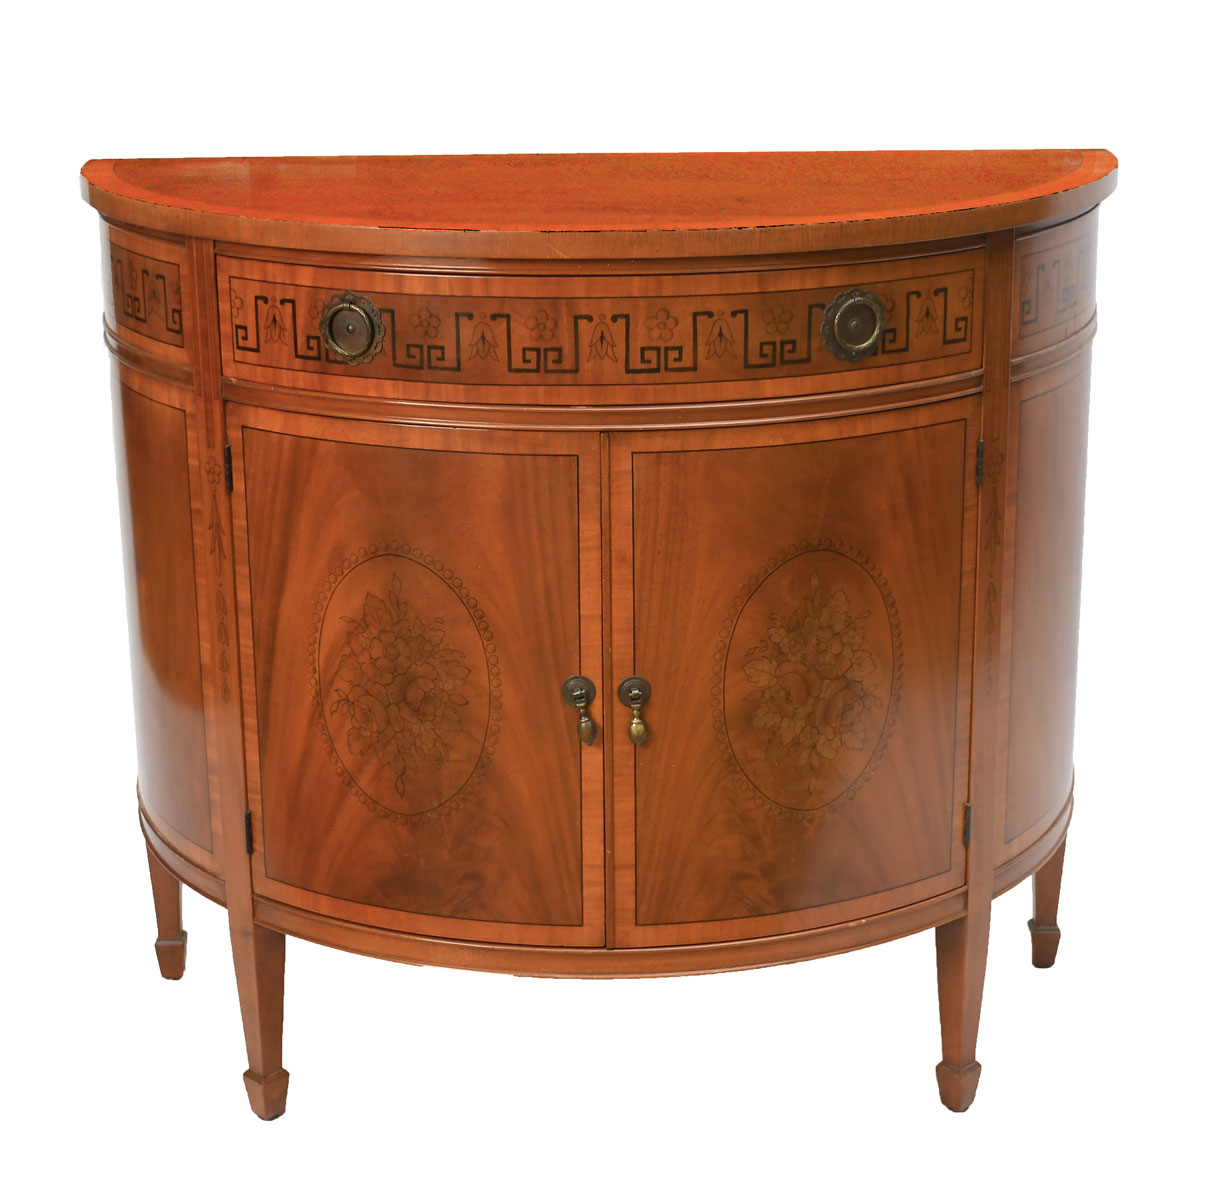 PAINTED MAHOGANY DEMI LUNE CHEST: